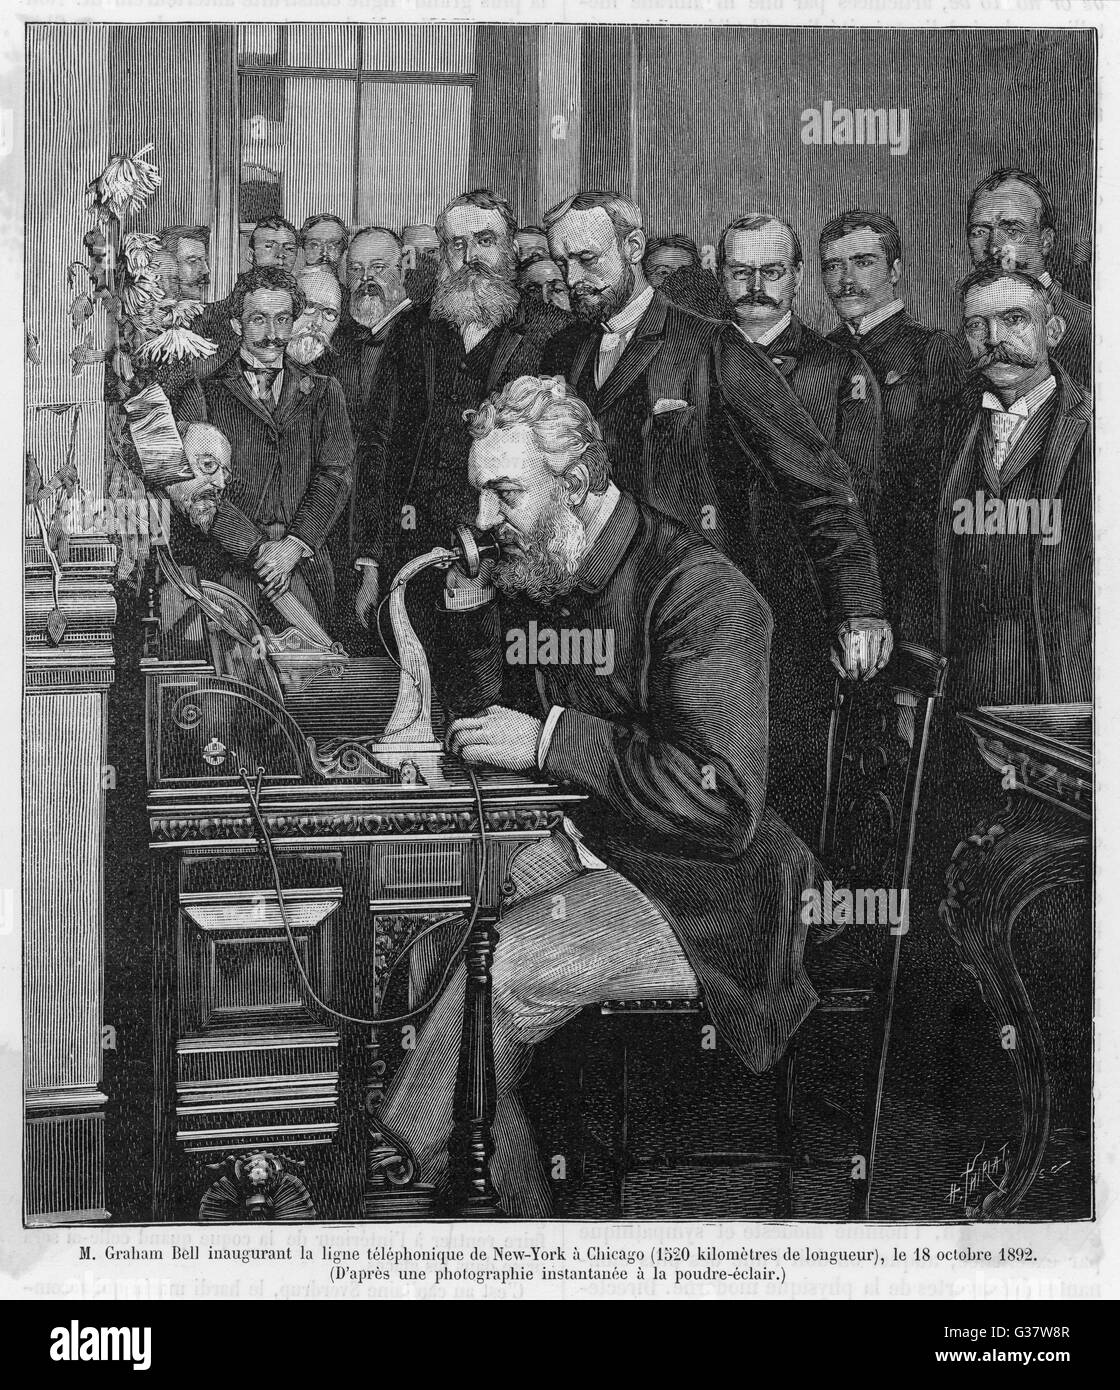 ALEXANDER GRAHAM BELL  American inventor and educator  inaugurates the New York- Chicago telephone on October  18th 1892     Date: 1847 - 1922 Stock Photo